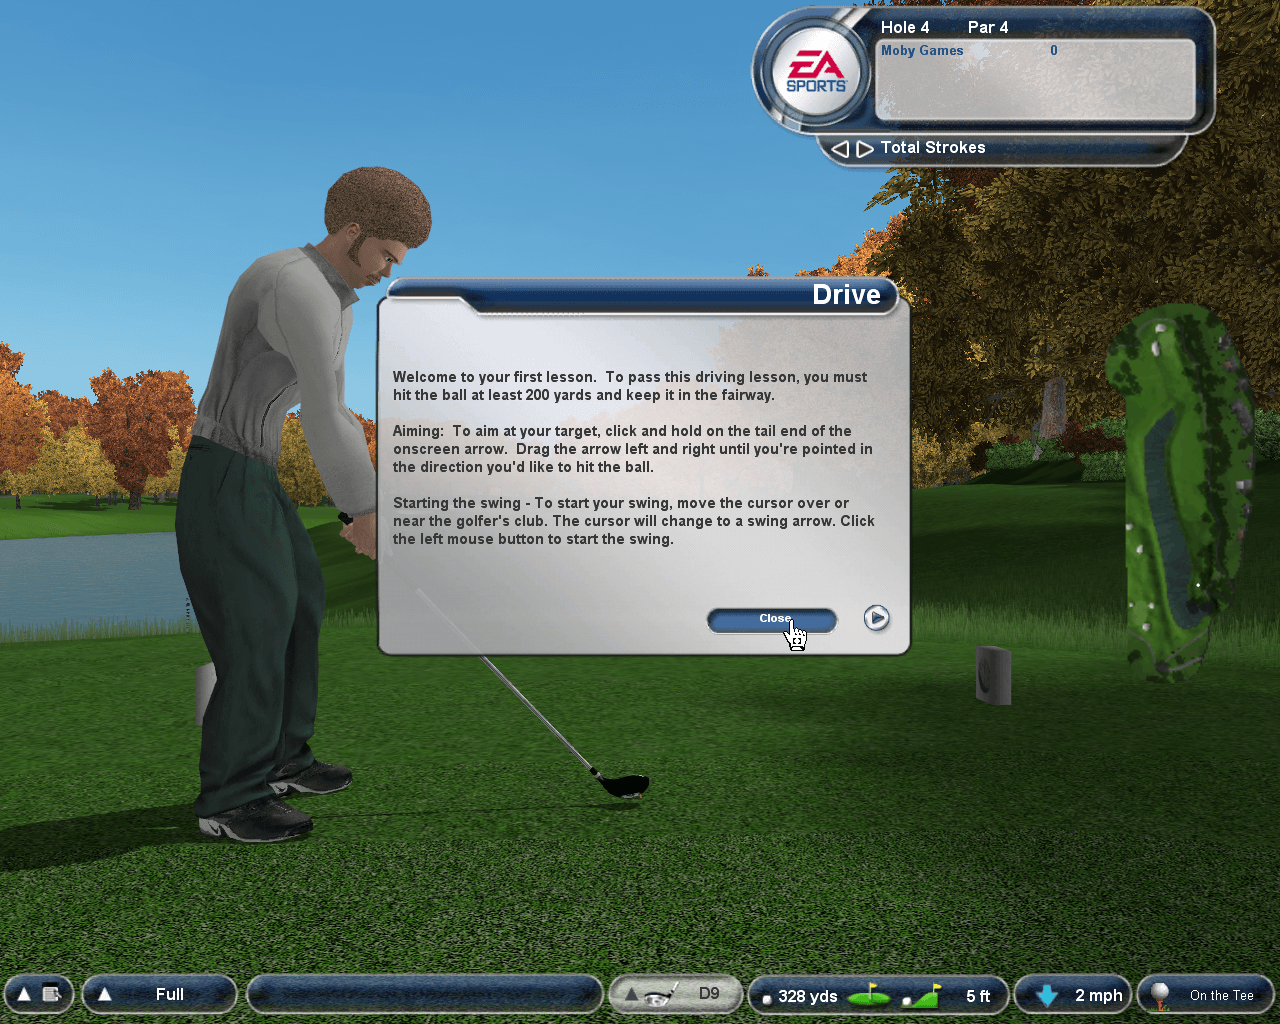 tiger woods pc download